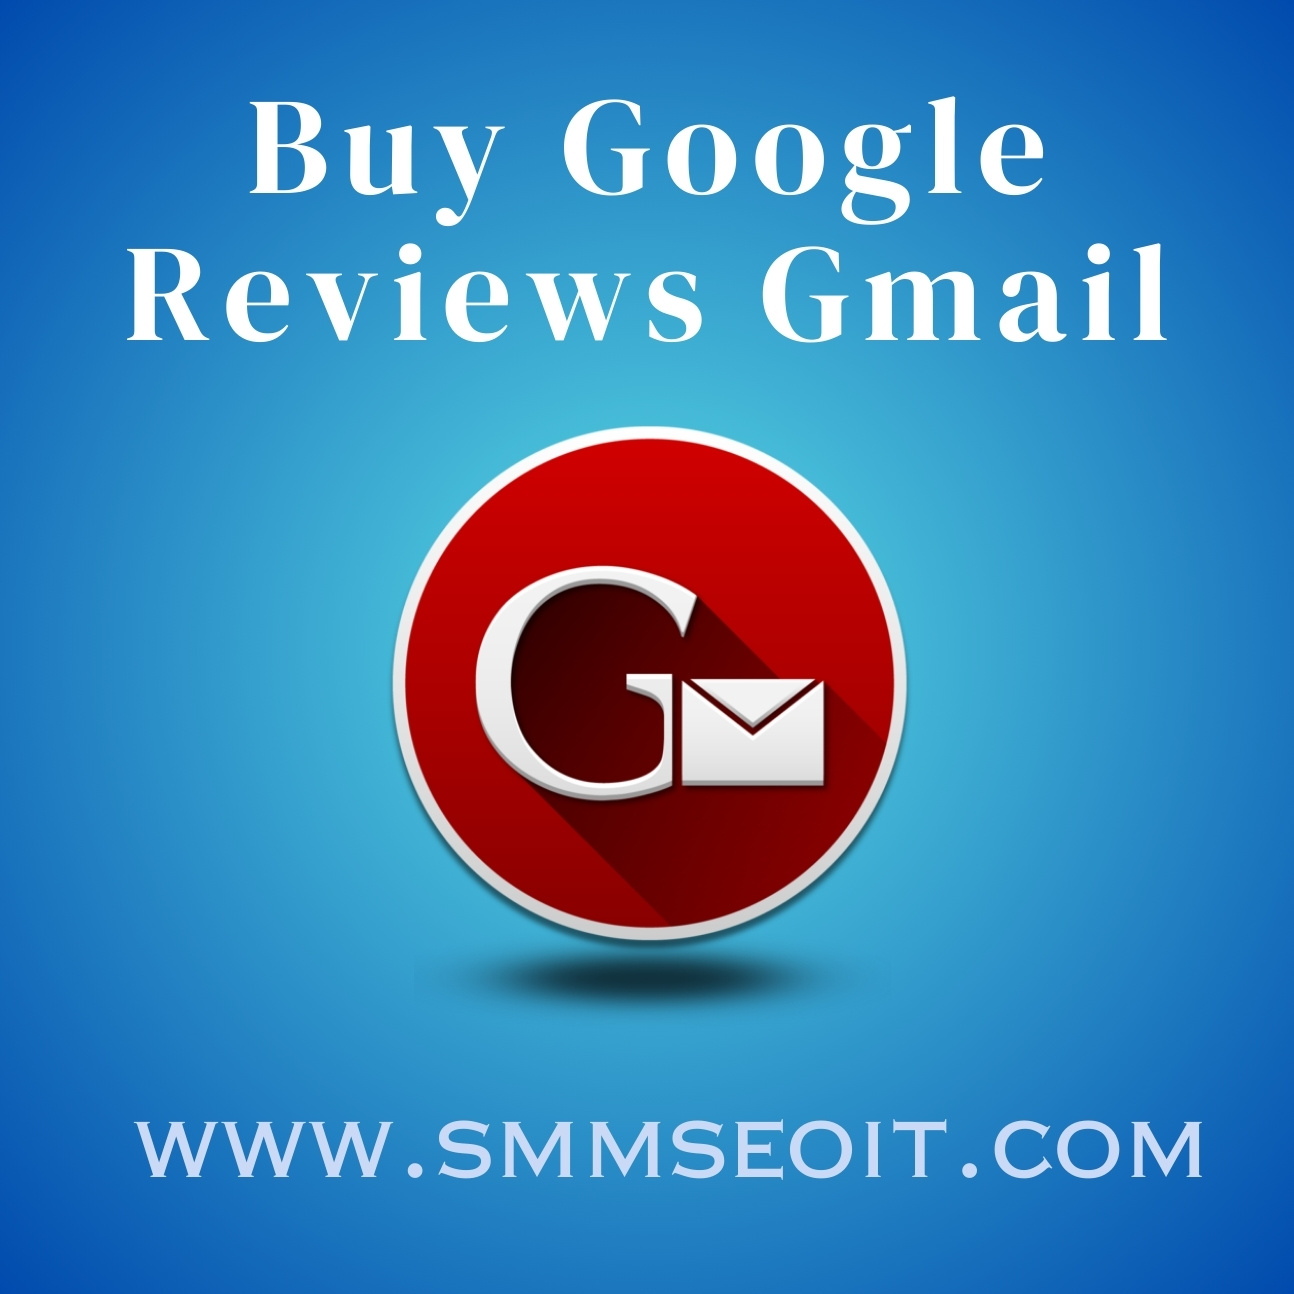 Buy Google Reviews Gmail Accounts | Instant Delivery